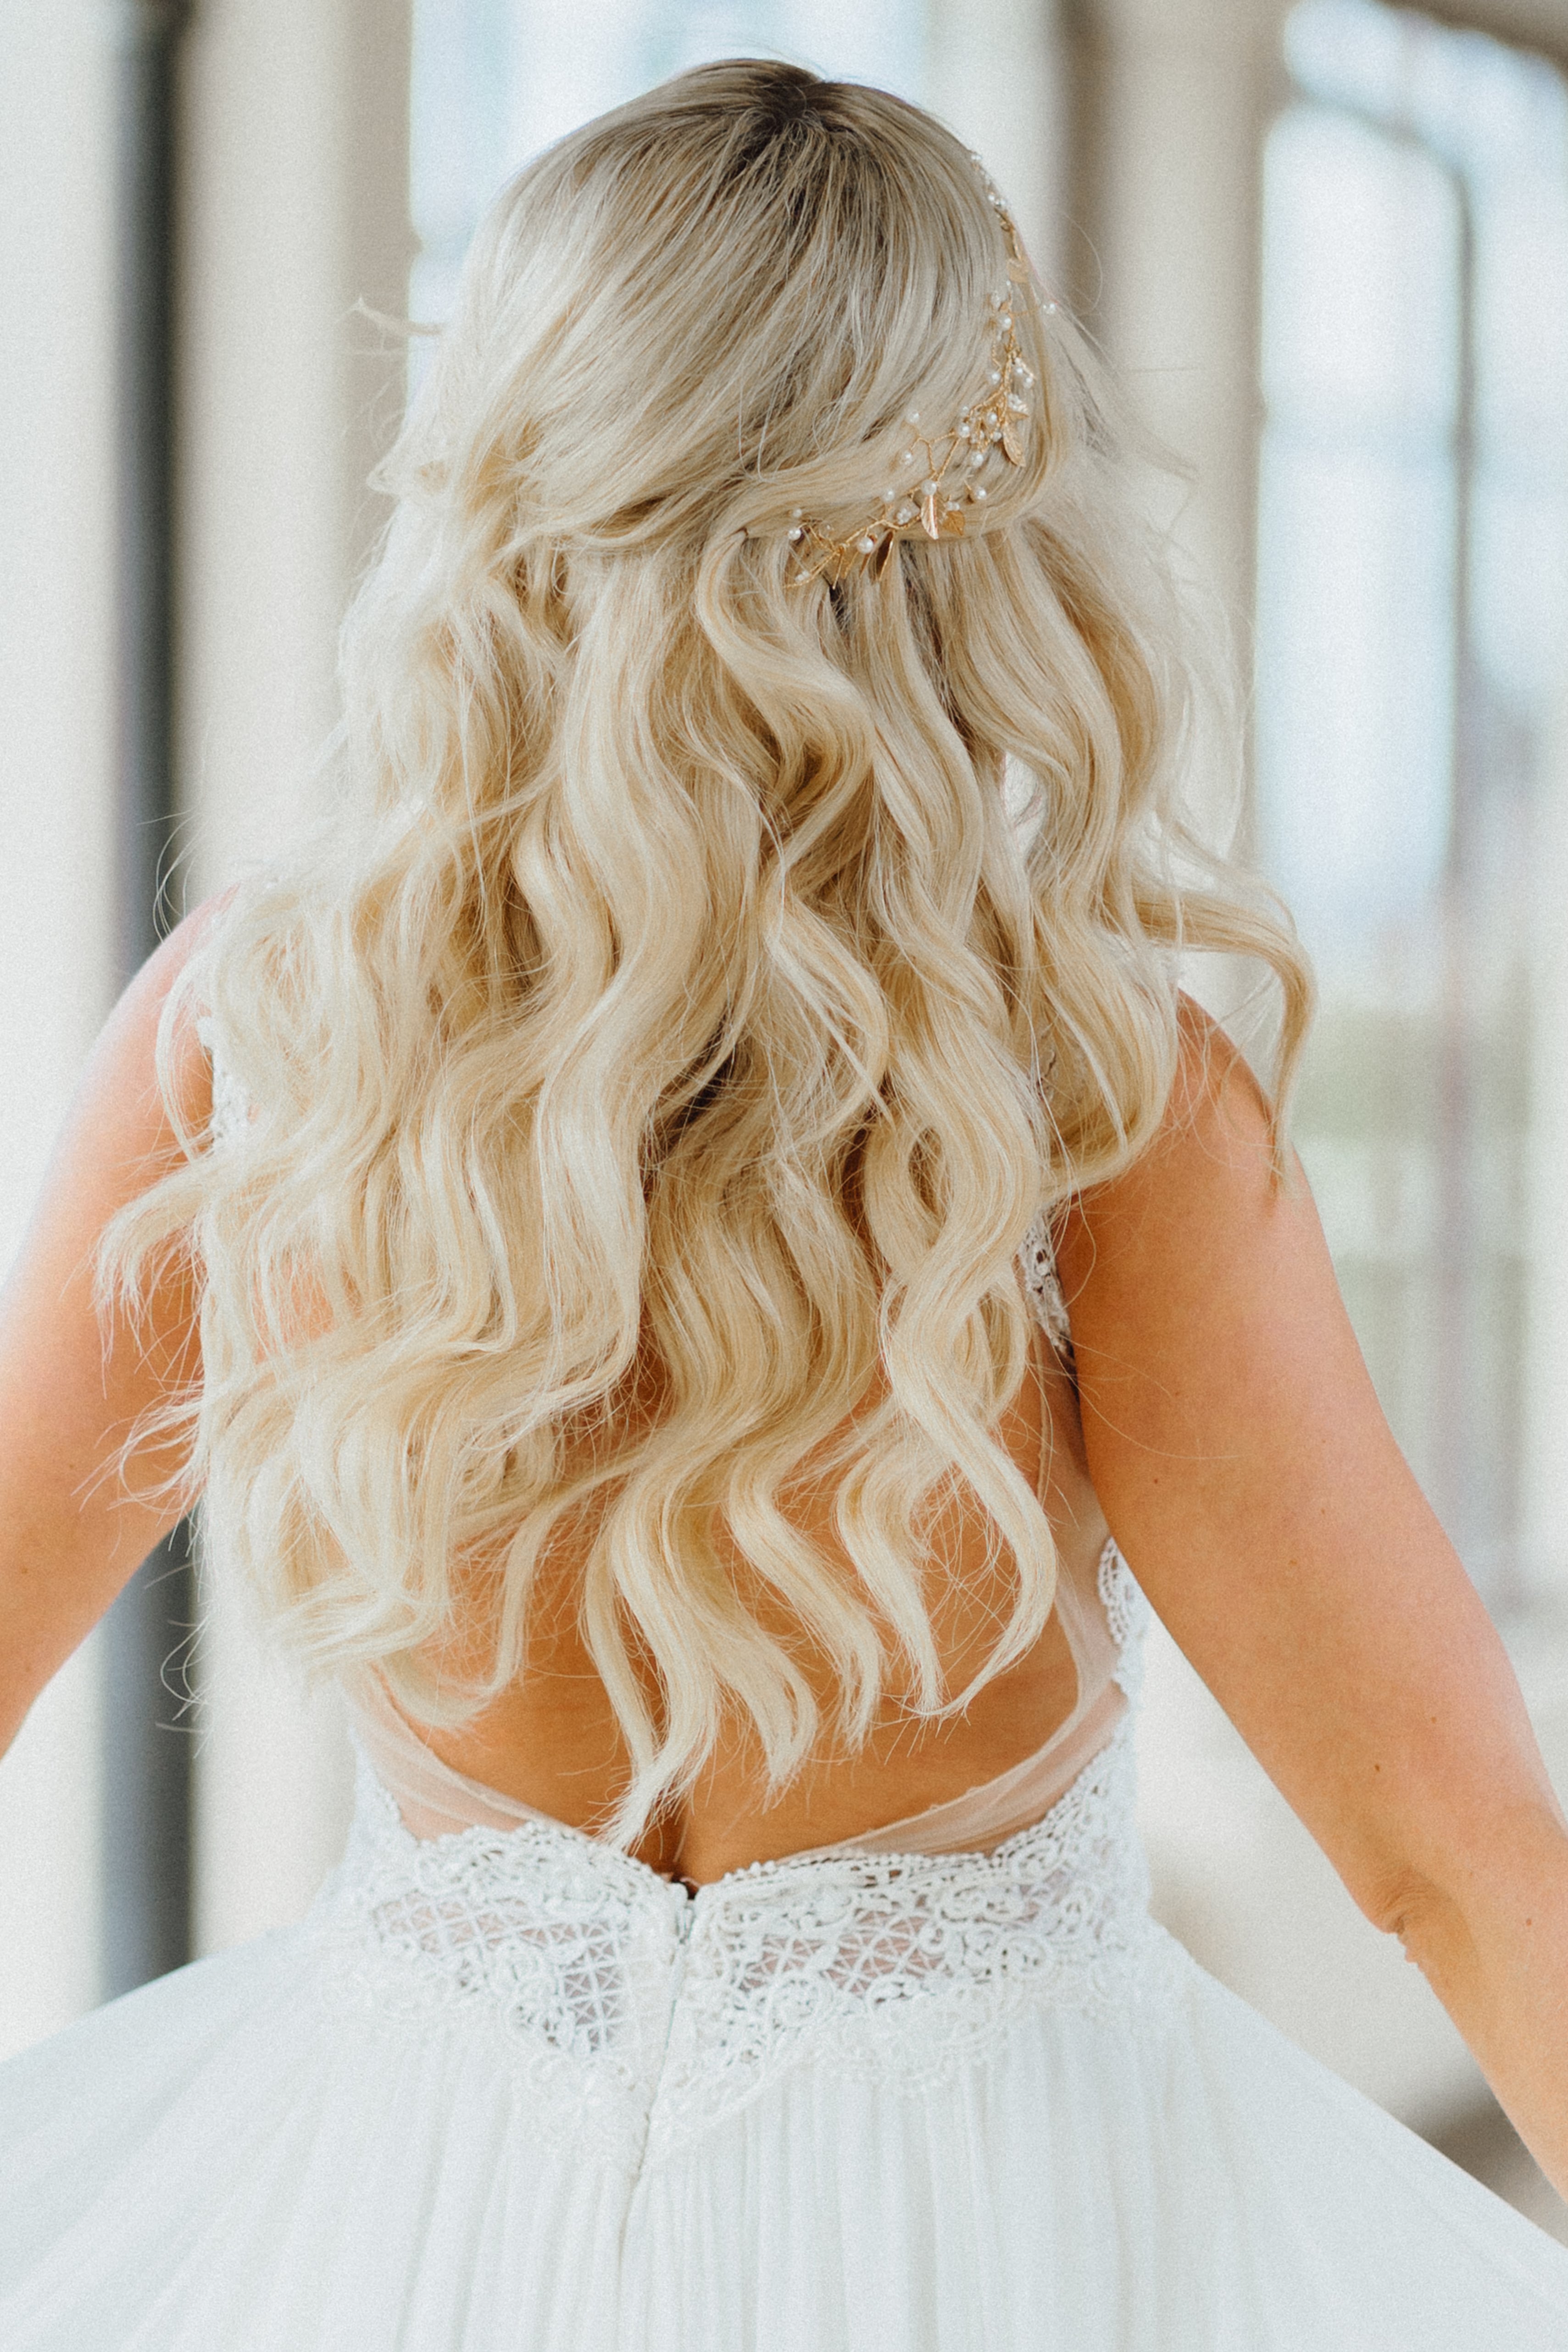 31 Best Wedding Hairstyles for Long Hair To Match Every Style, As